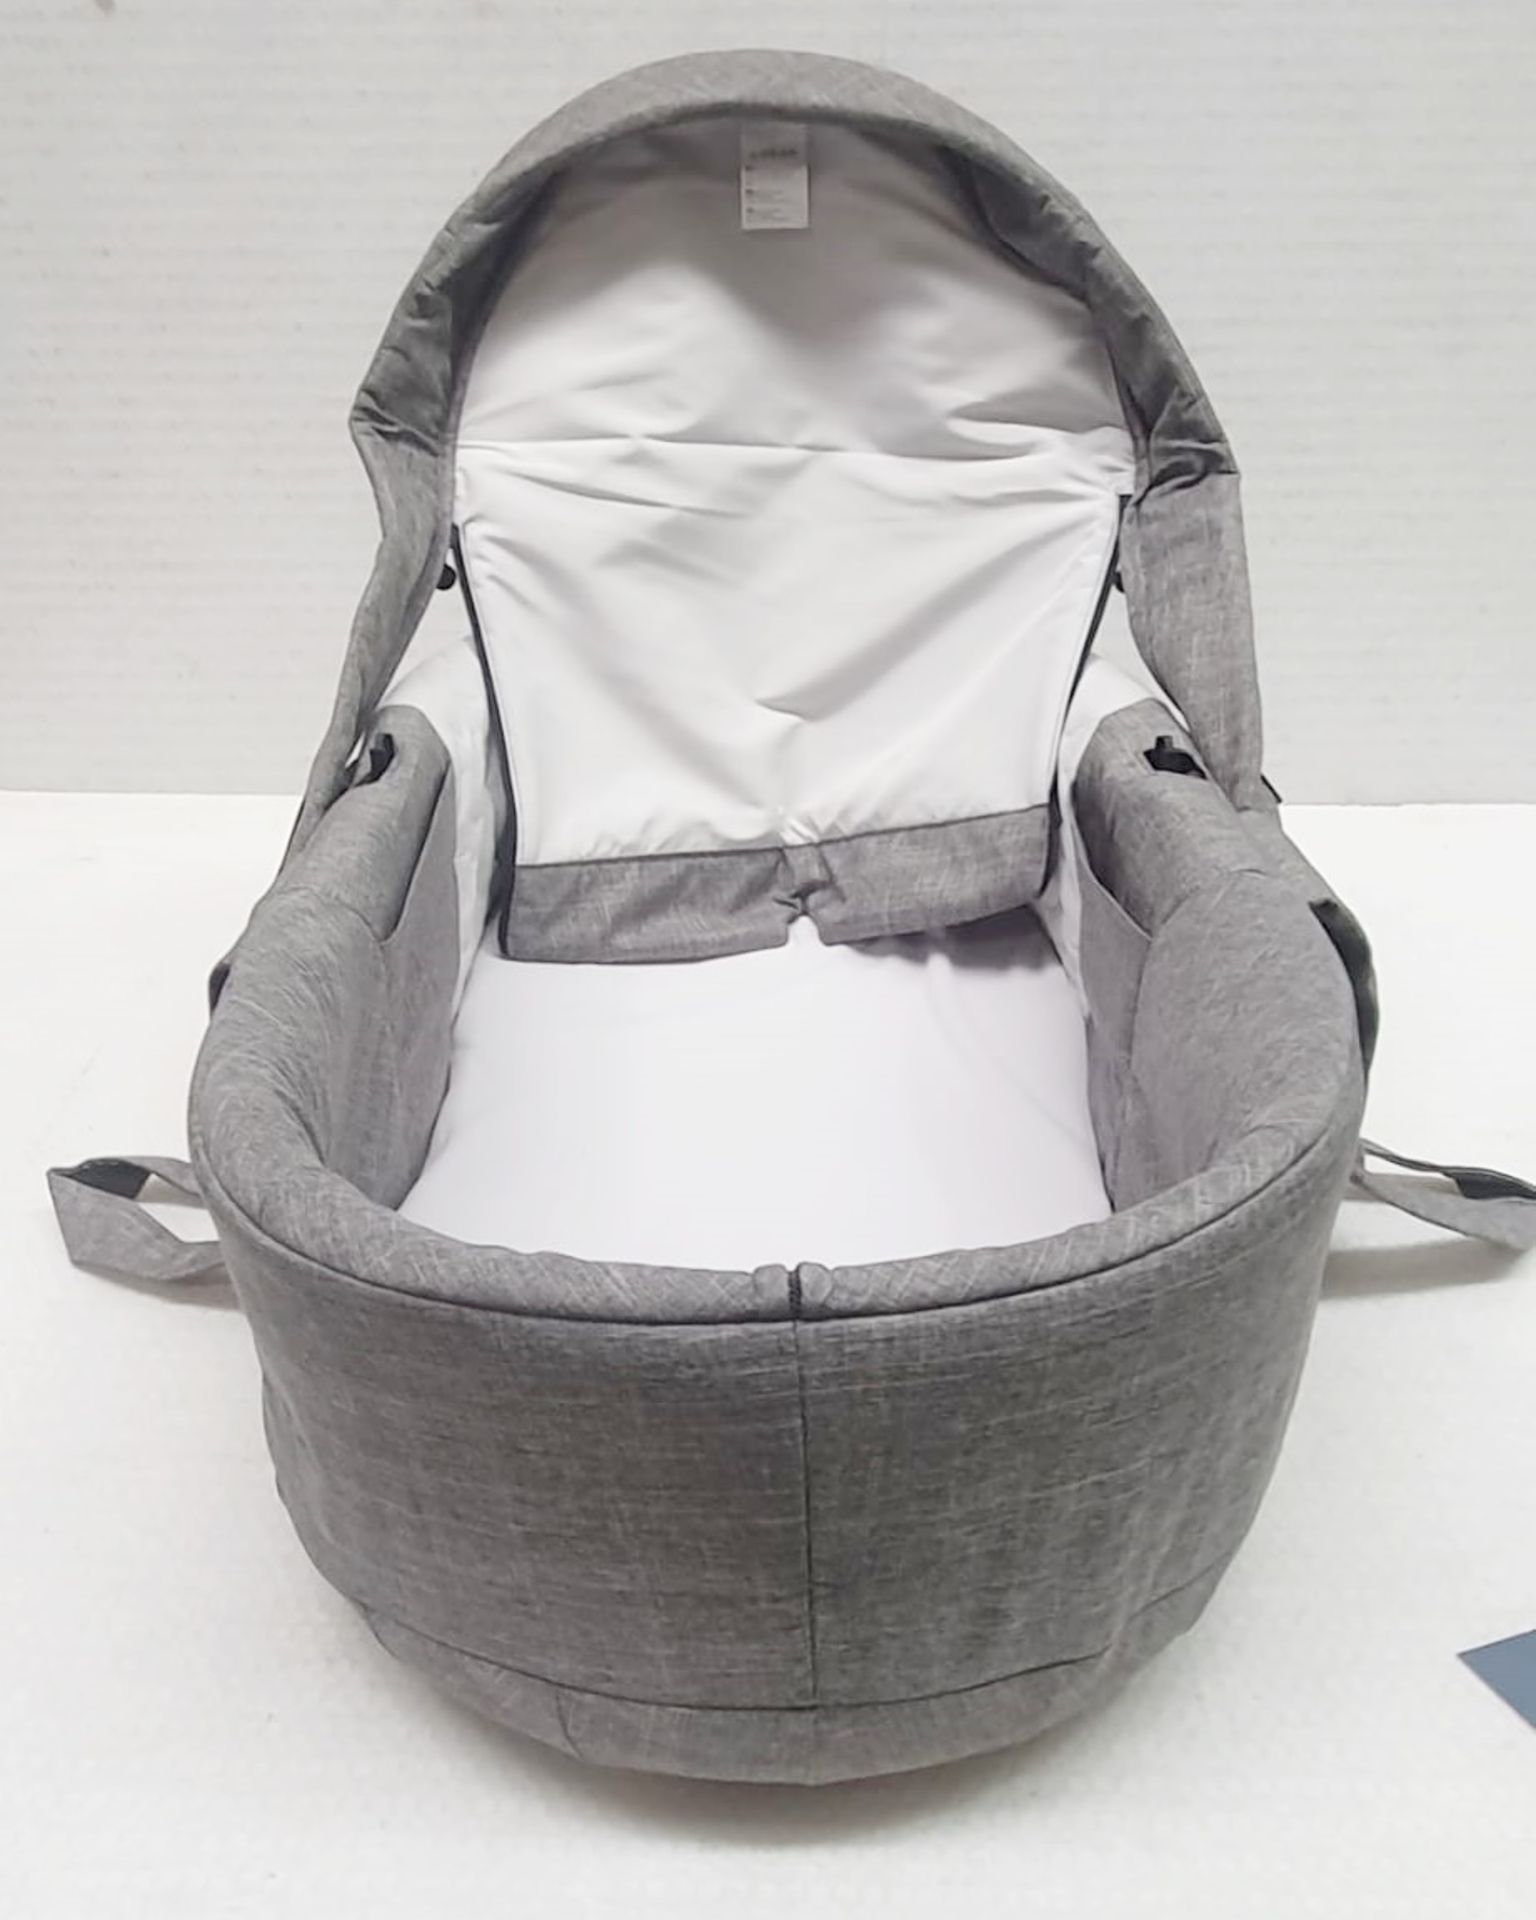 1 x STOKKE Beat Carry Cot - Original Price £199.99 - Unused Boxed Stock - Ref: HTY320 / WH2-SCT - - Image 9 of 9